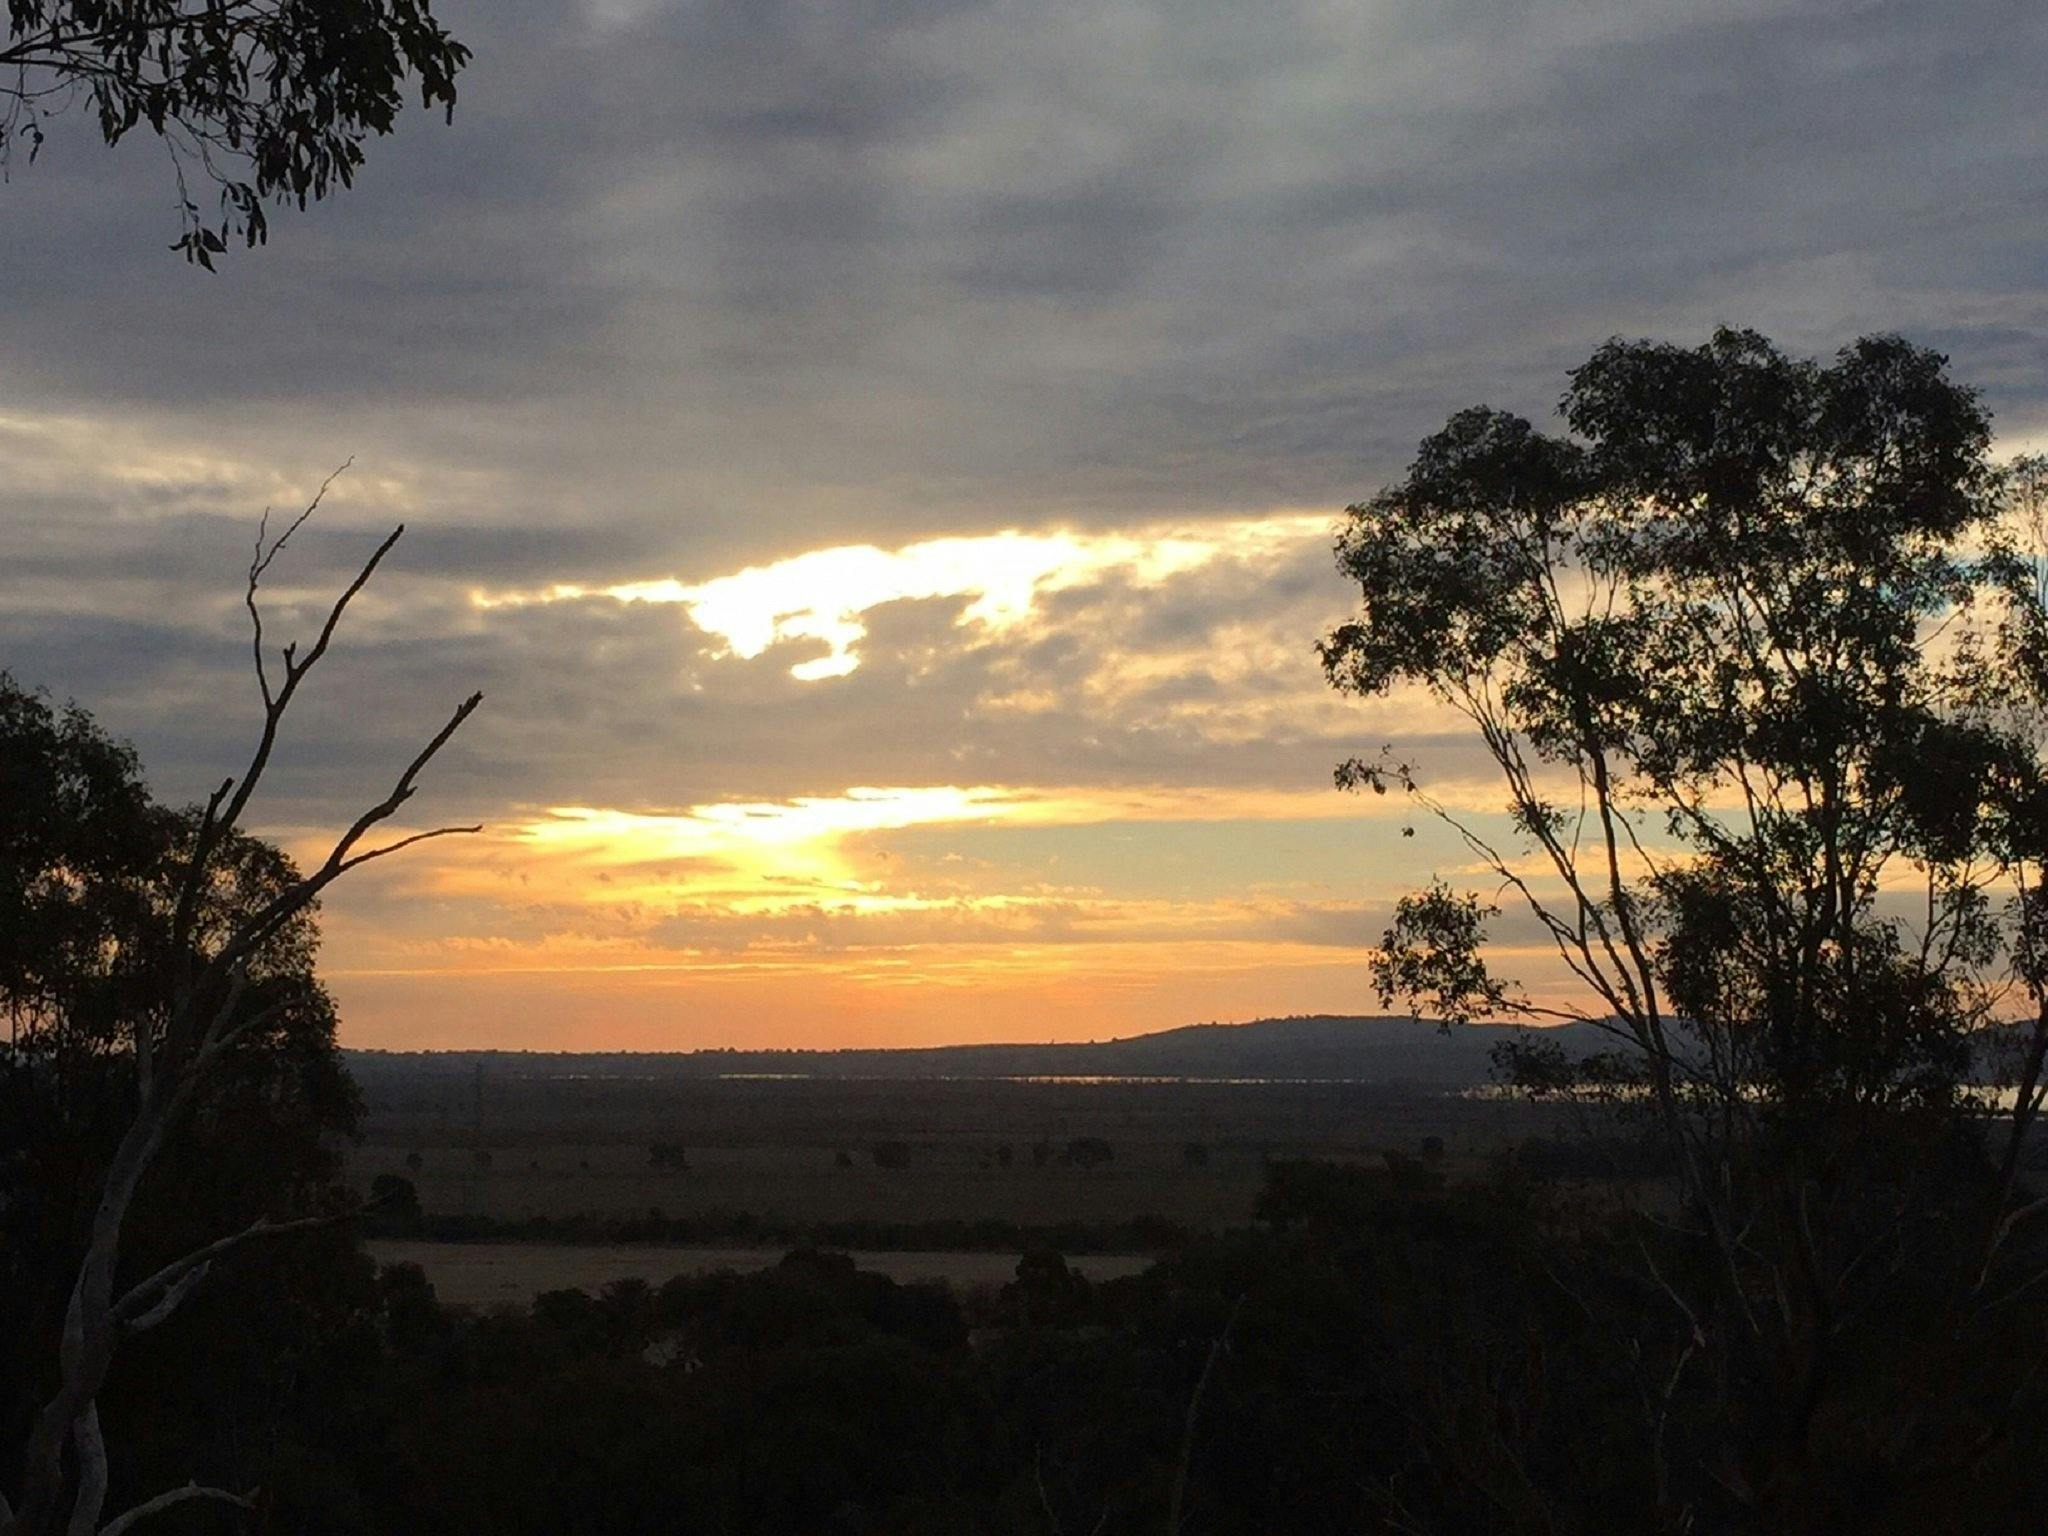 Sunset at Days' Lookout